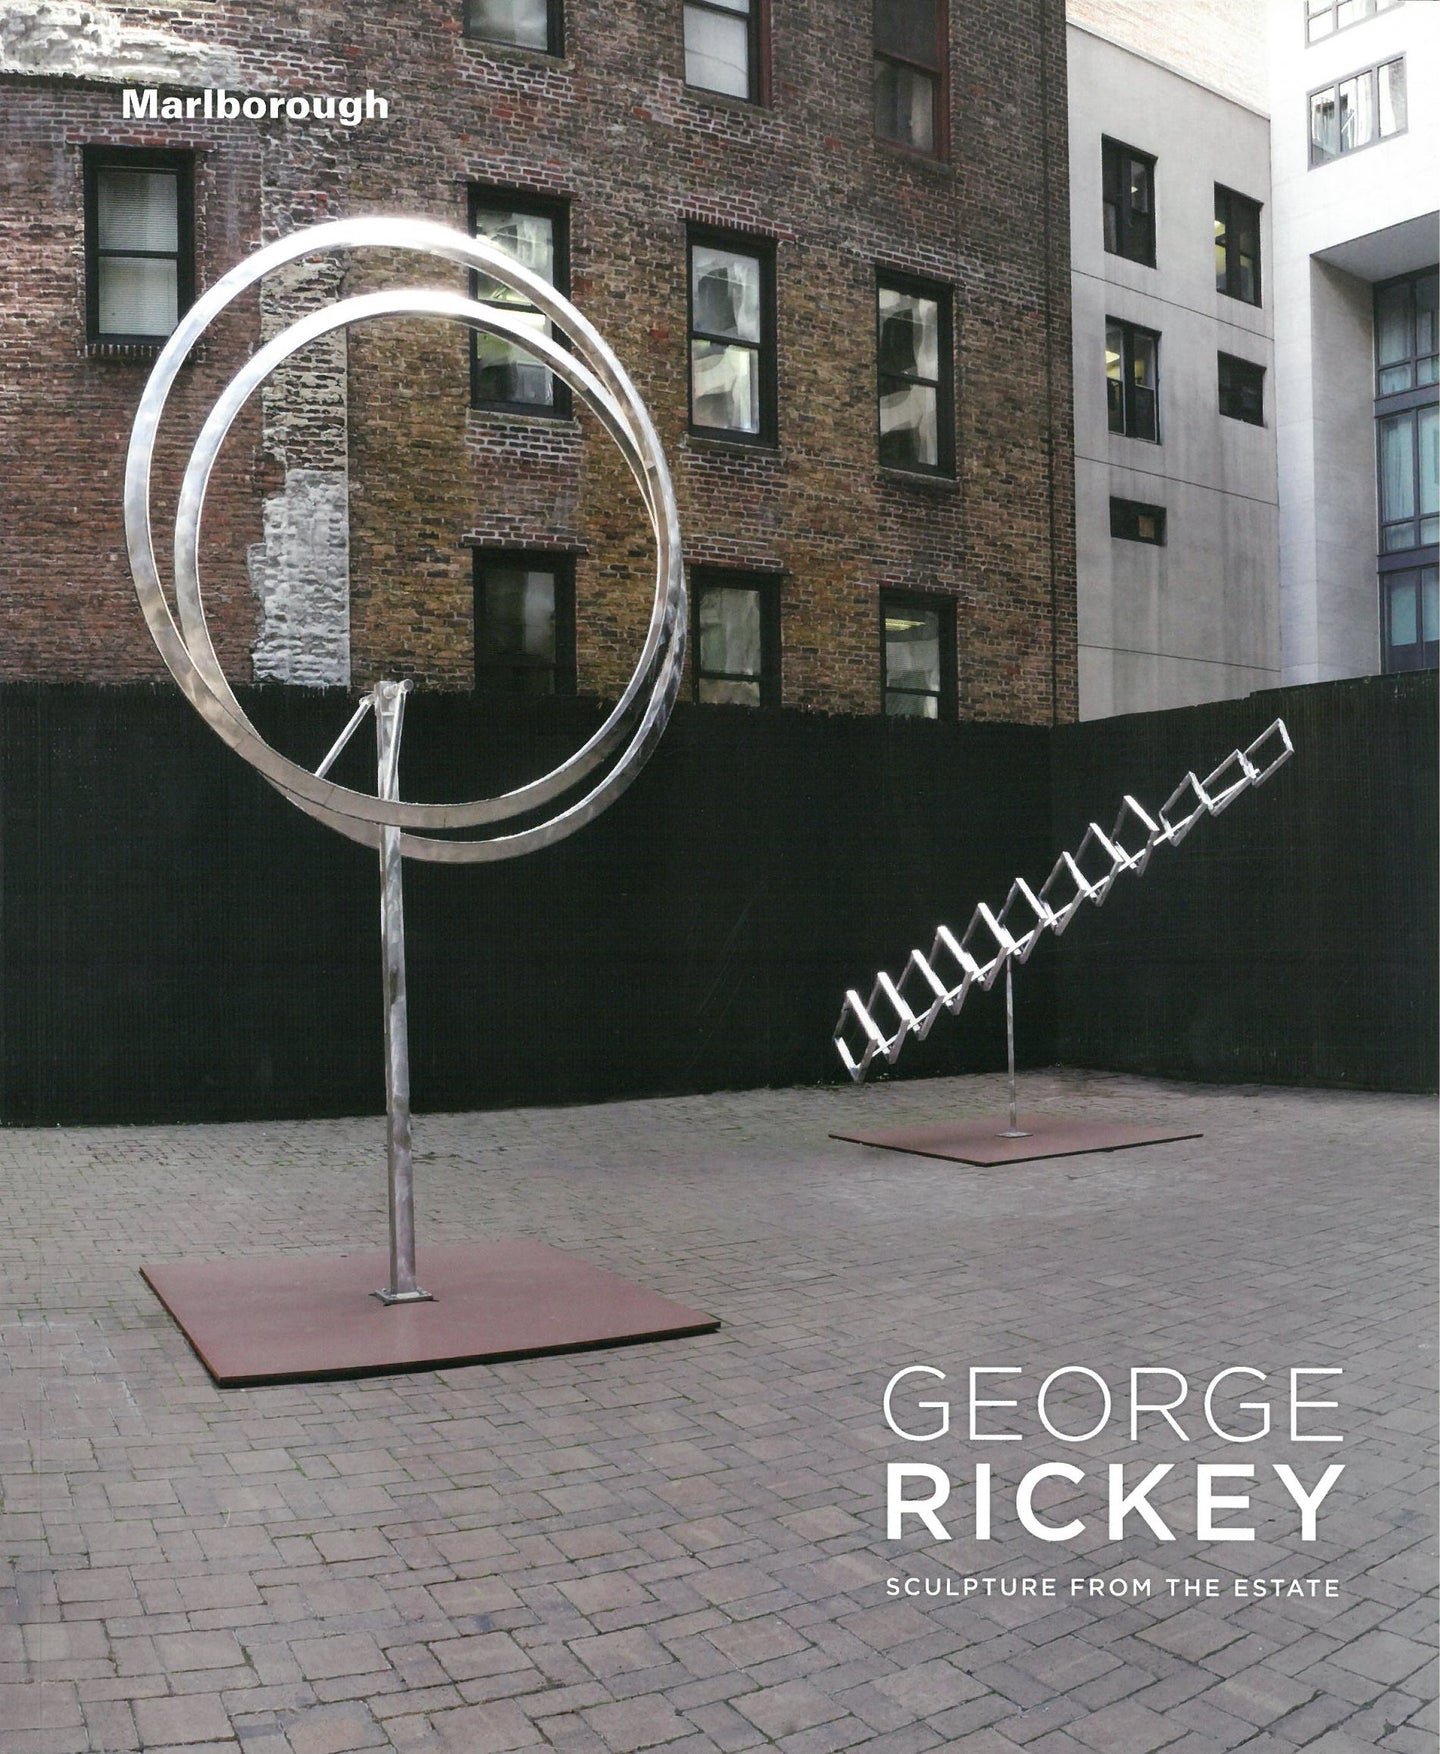 George Rickey: Sculpture from the Estate